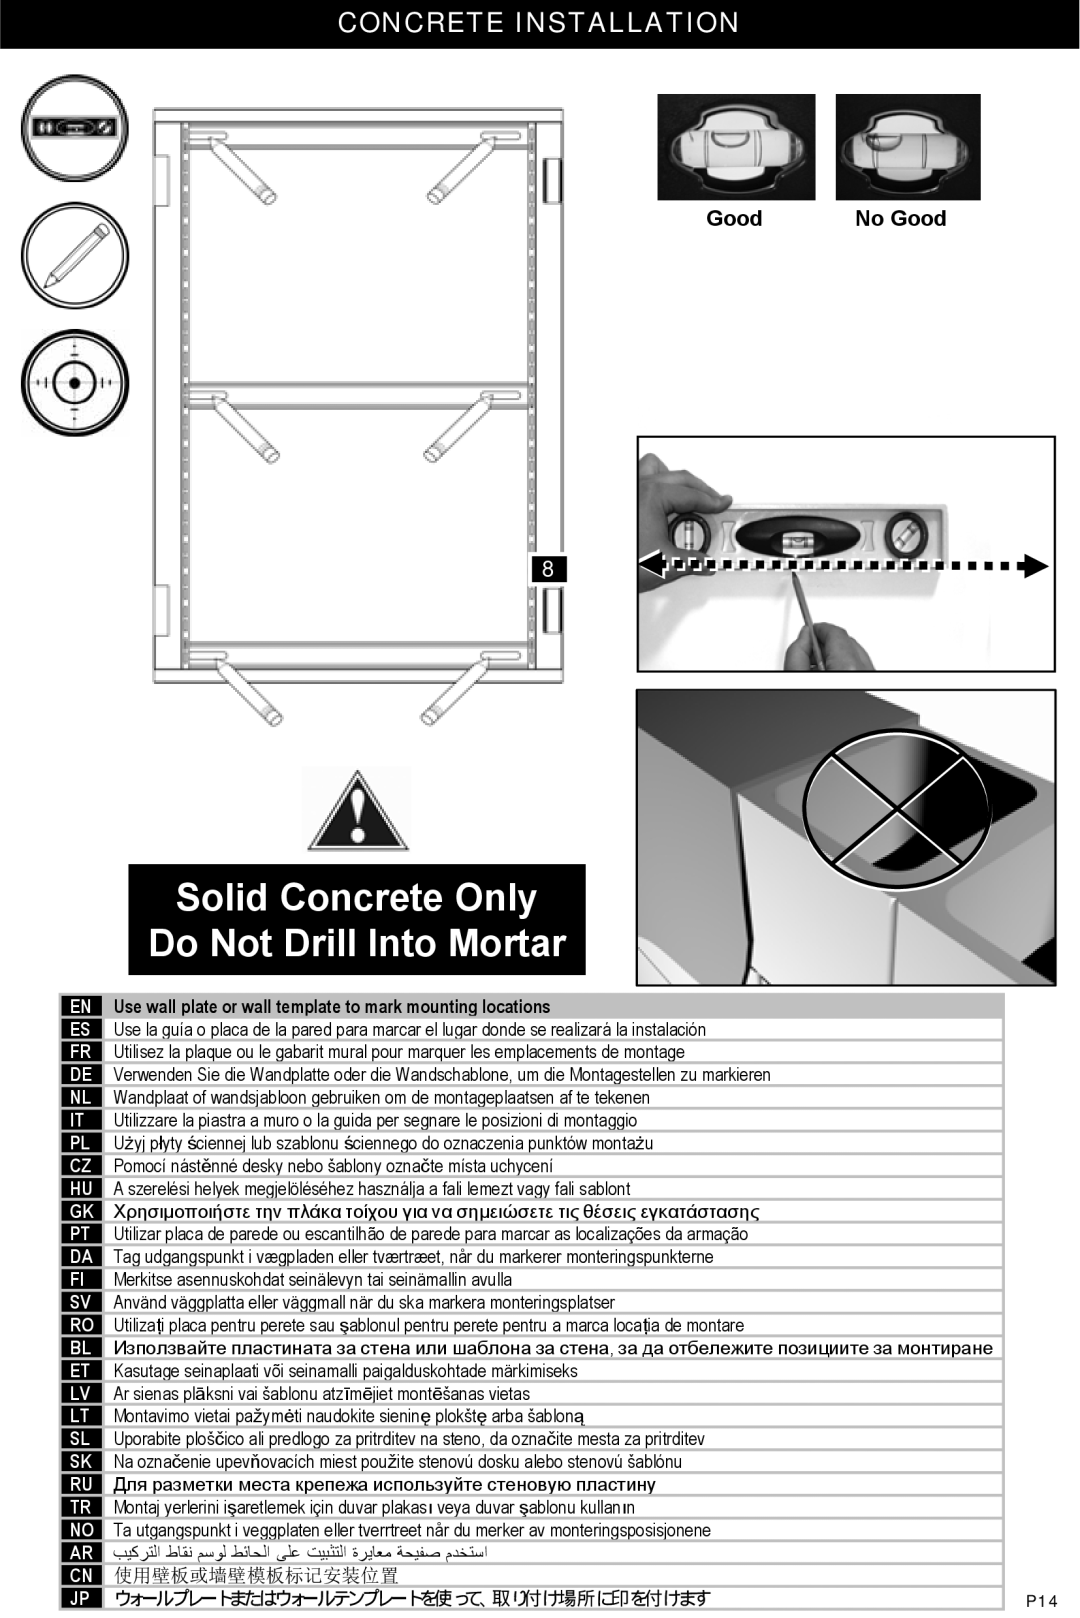 Omnimount RSW, 10135 instruction manual Solid Concrete Only, Concrete Installation, Do Not Drill Into Mortar 